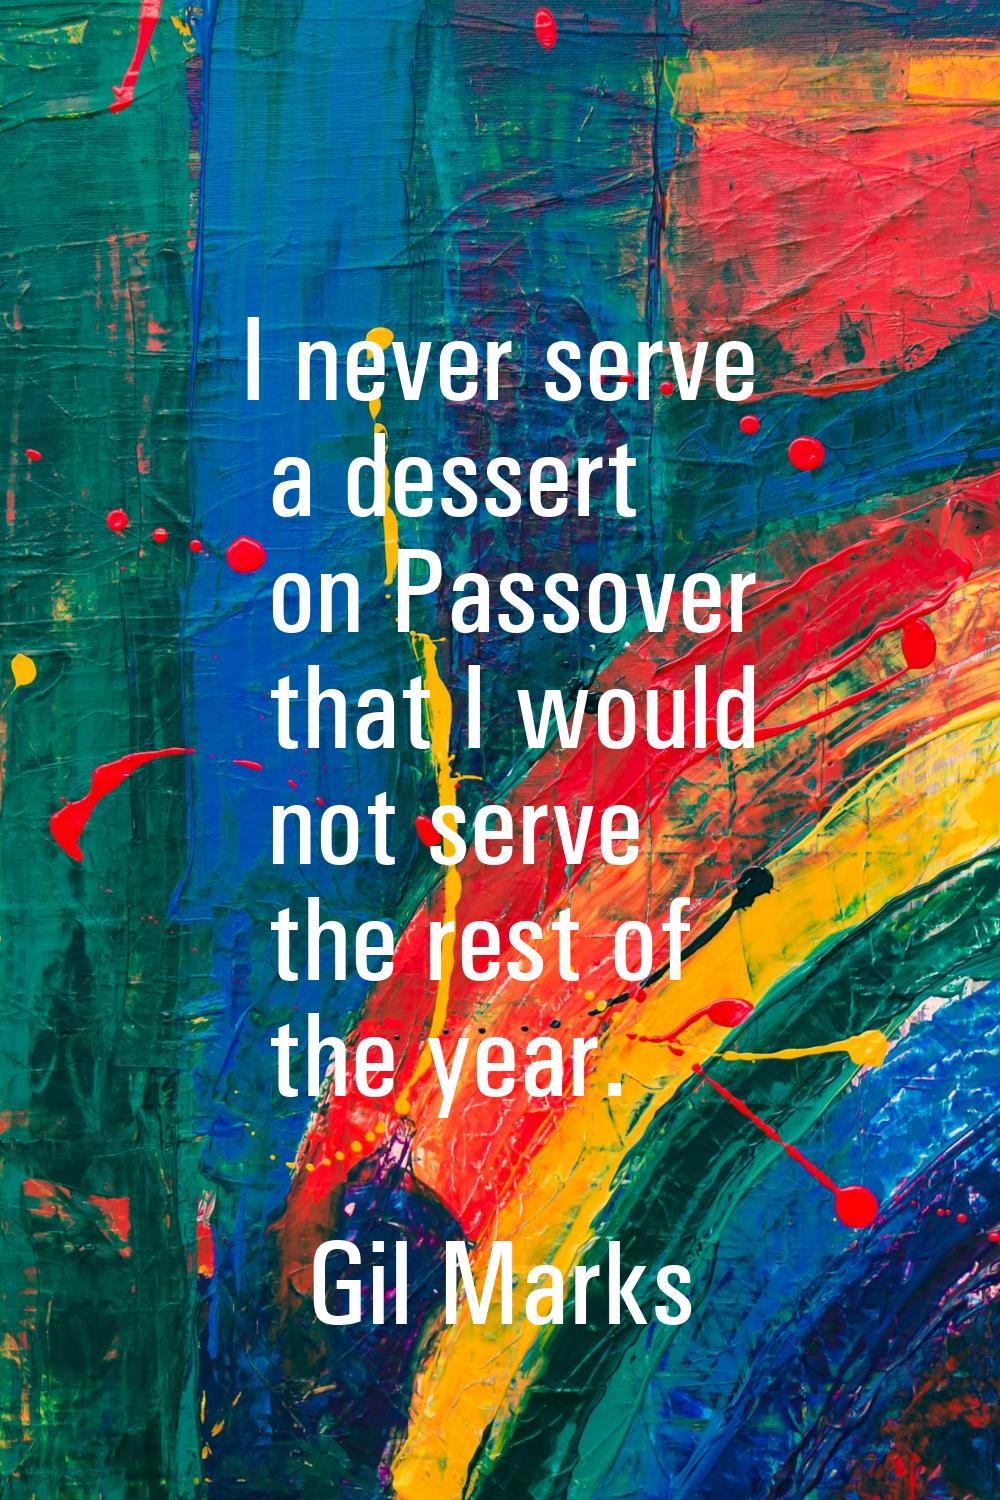 I never serve a dessert on Passover that I would not serve the rest of the year.